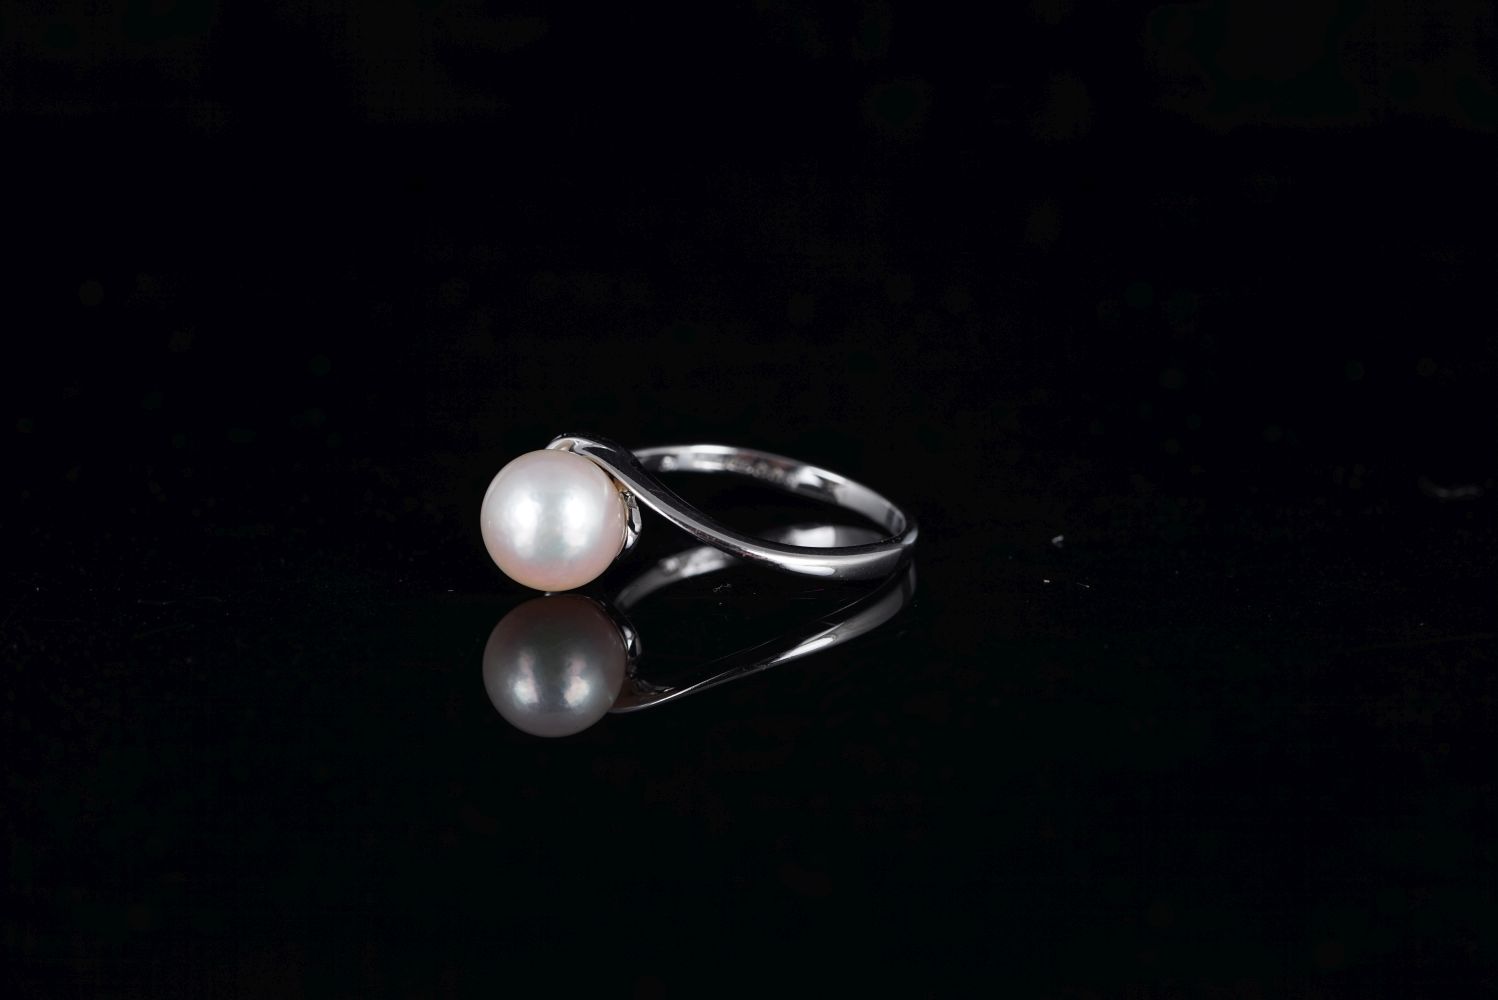 PEARL & DIAMOND 18CT WHITE GOLD RING - Image 2 of 2